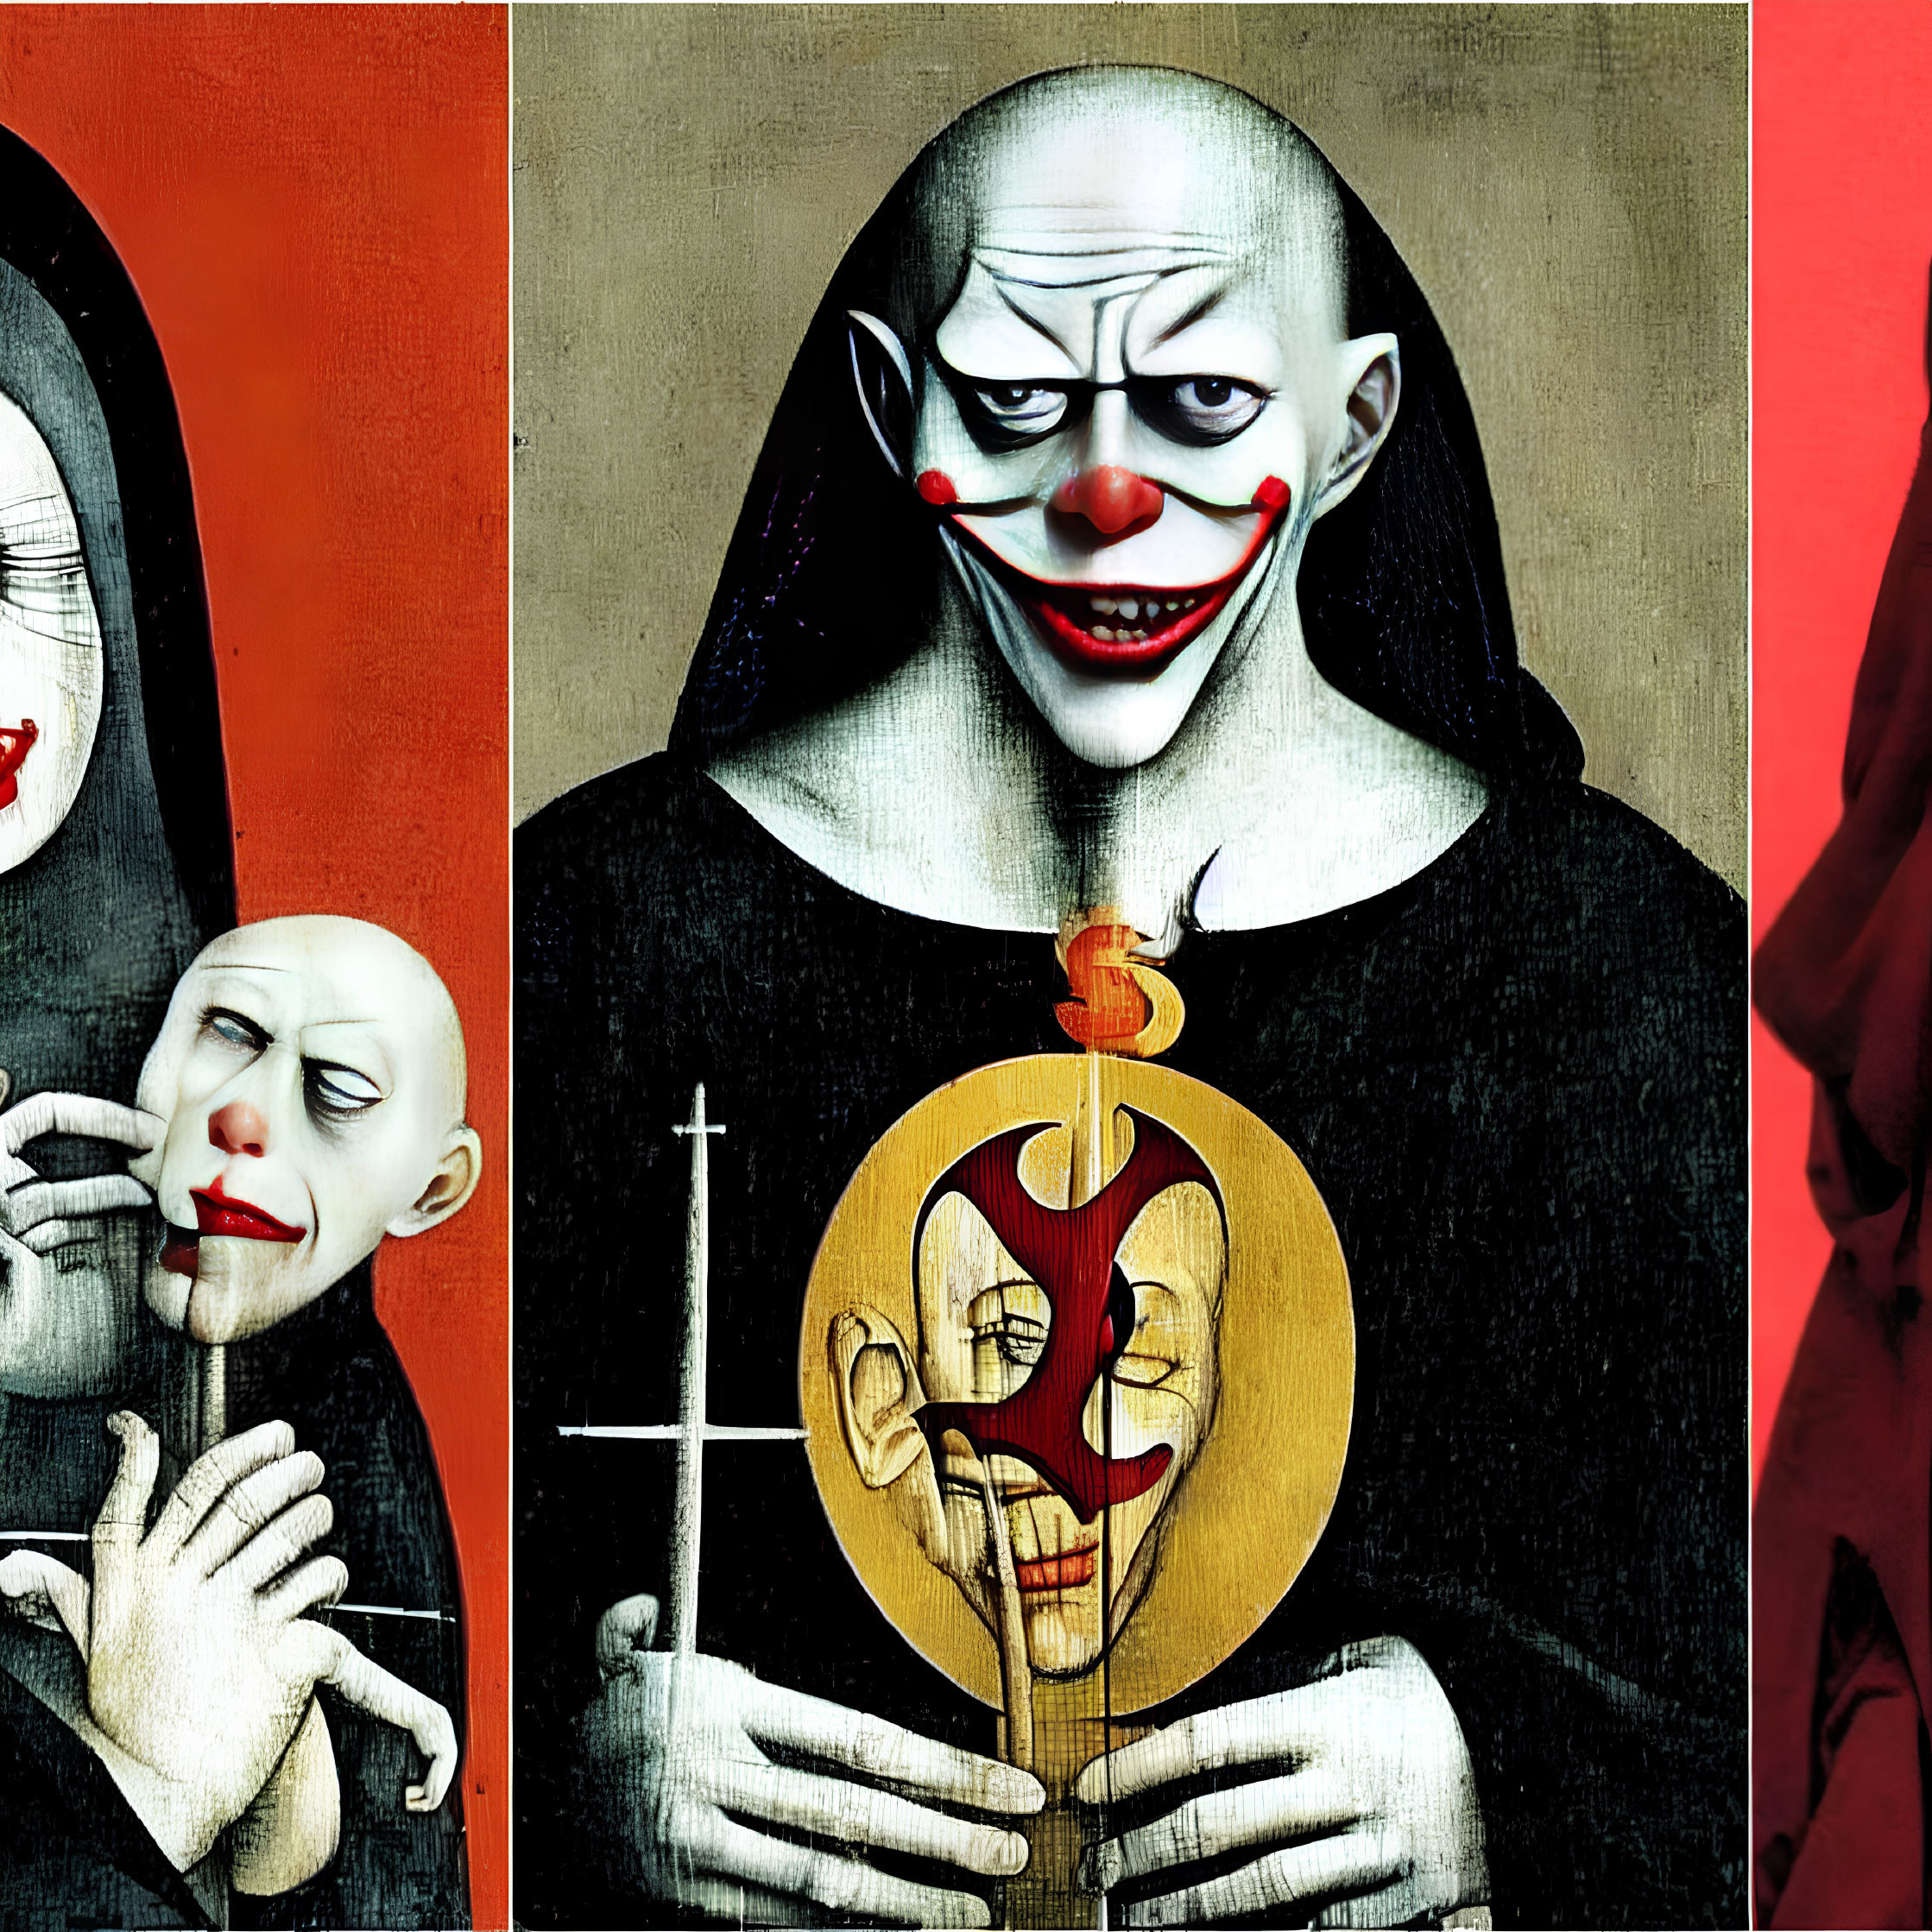 Sinister clown triptych with mask, cross, and apple skull in red and black palette